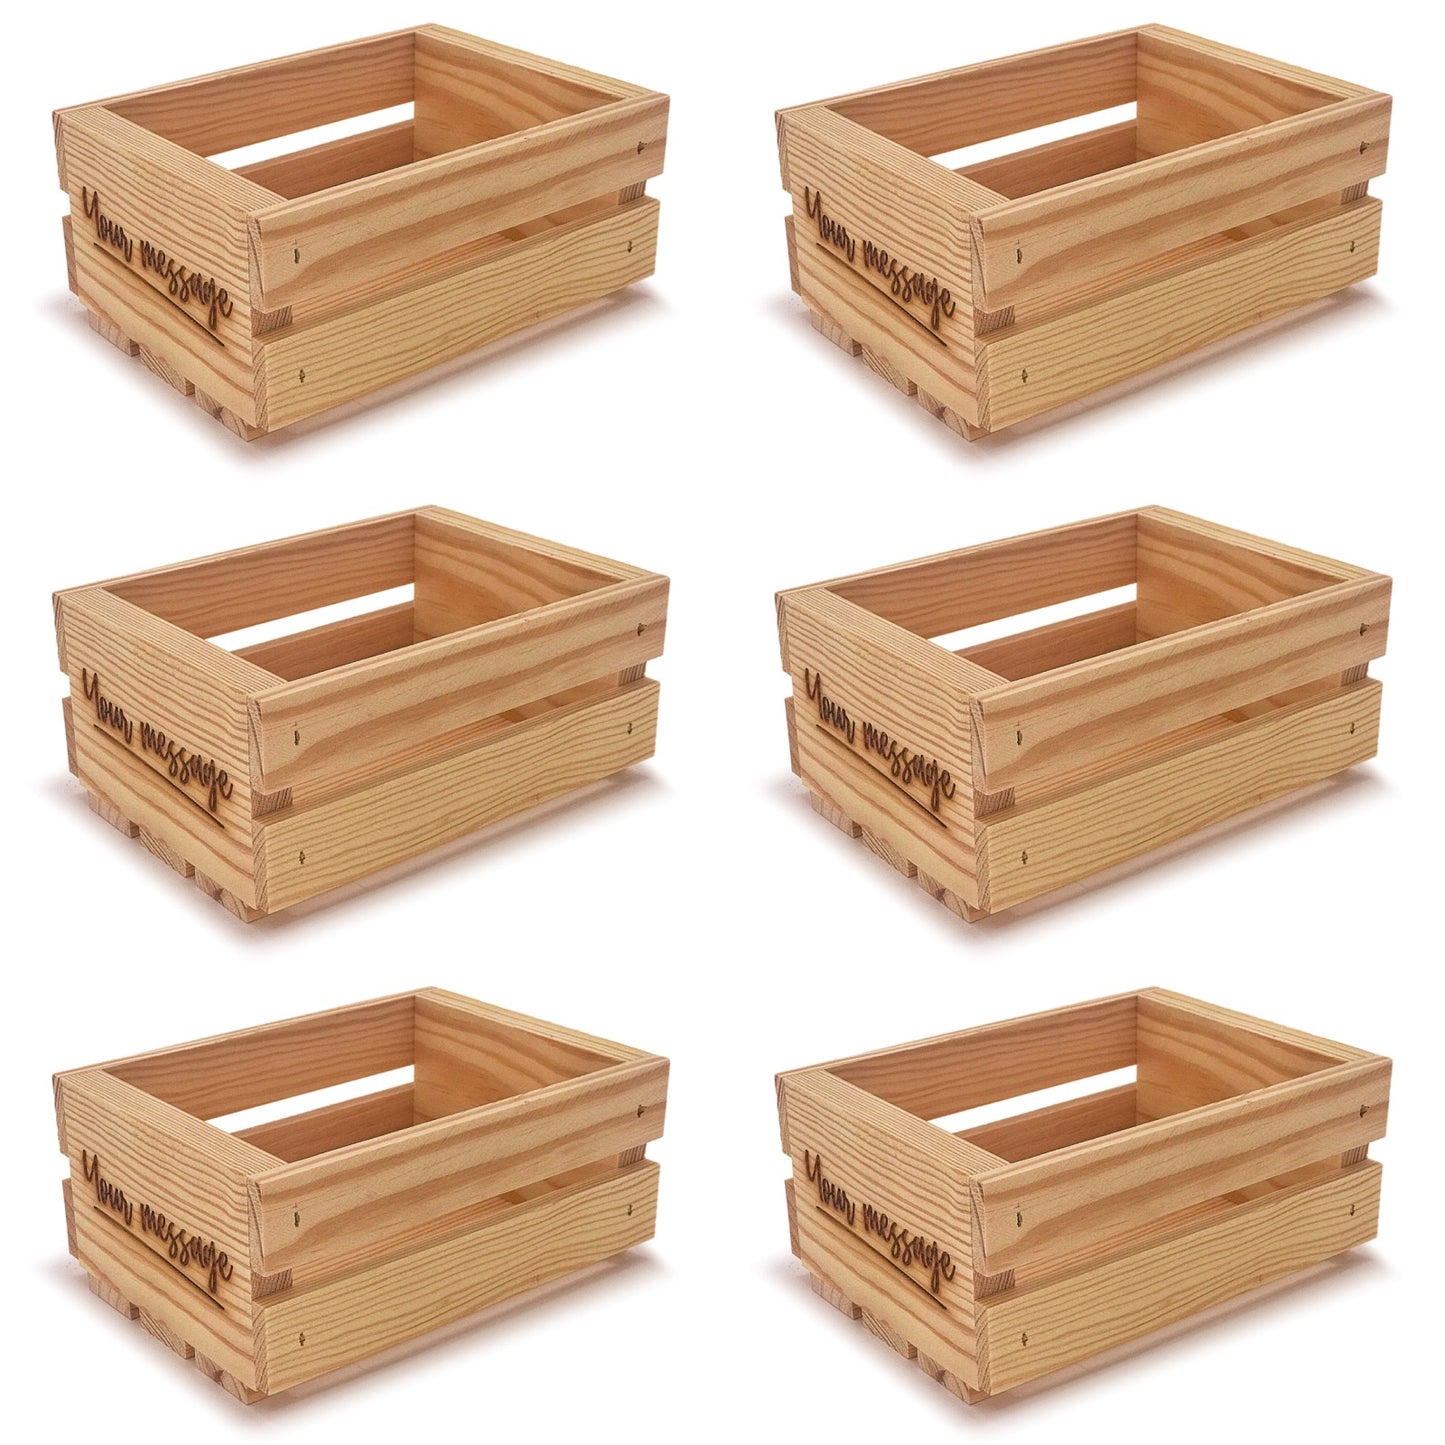 6 Small wooden crates with custom message 7.125x5.5x3.5